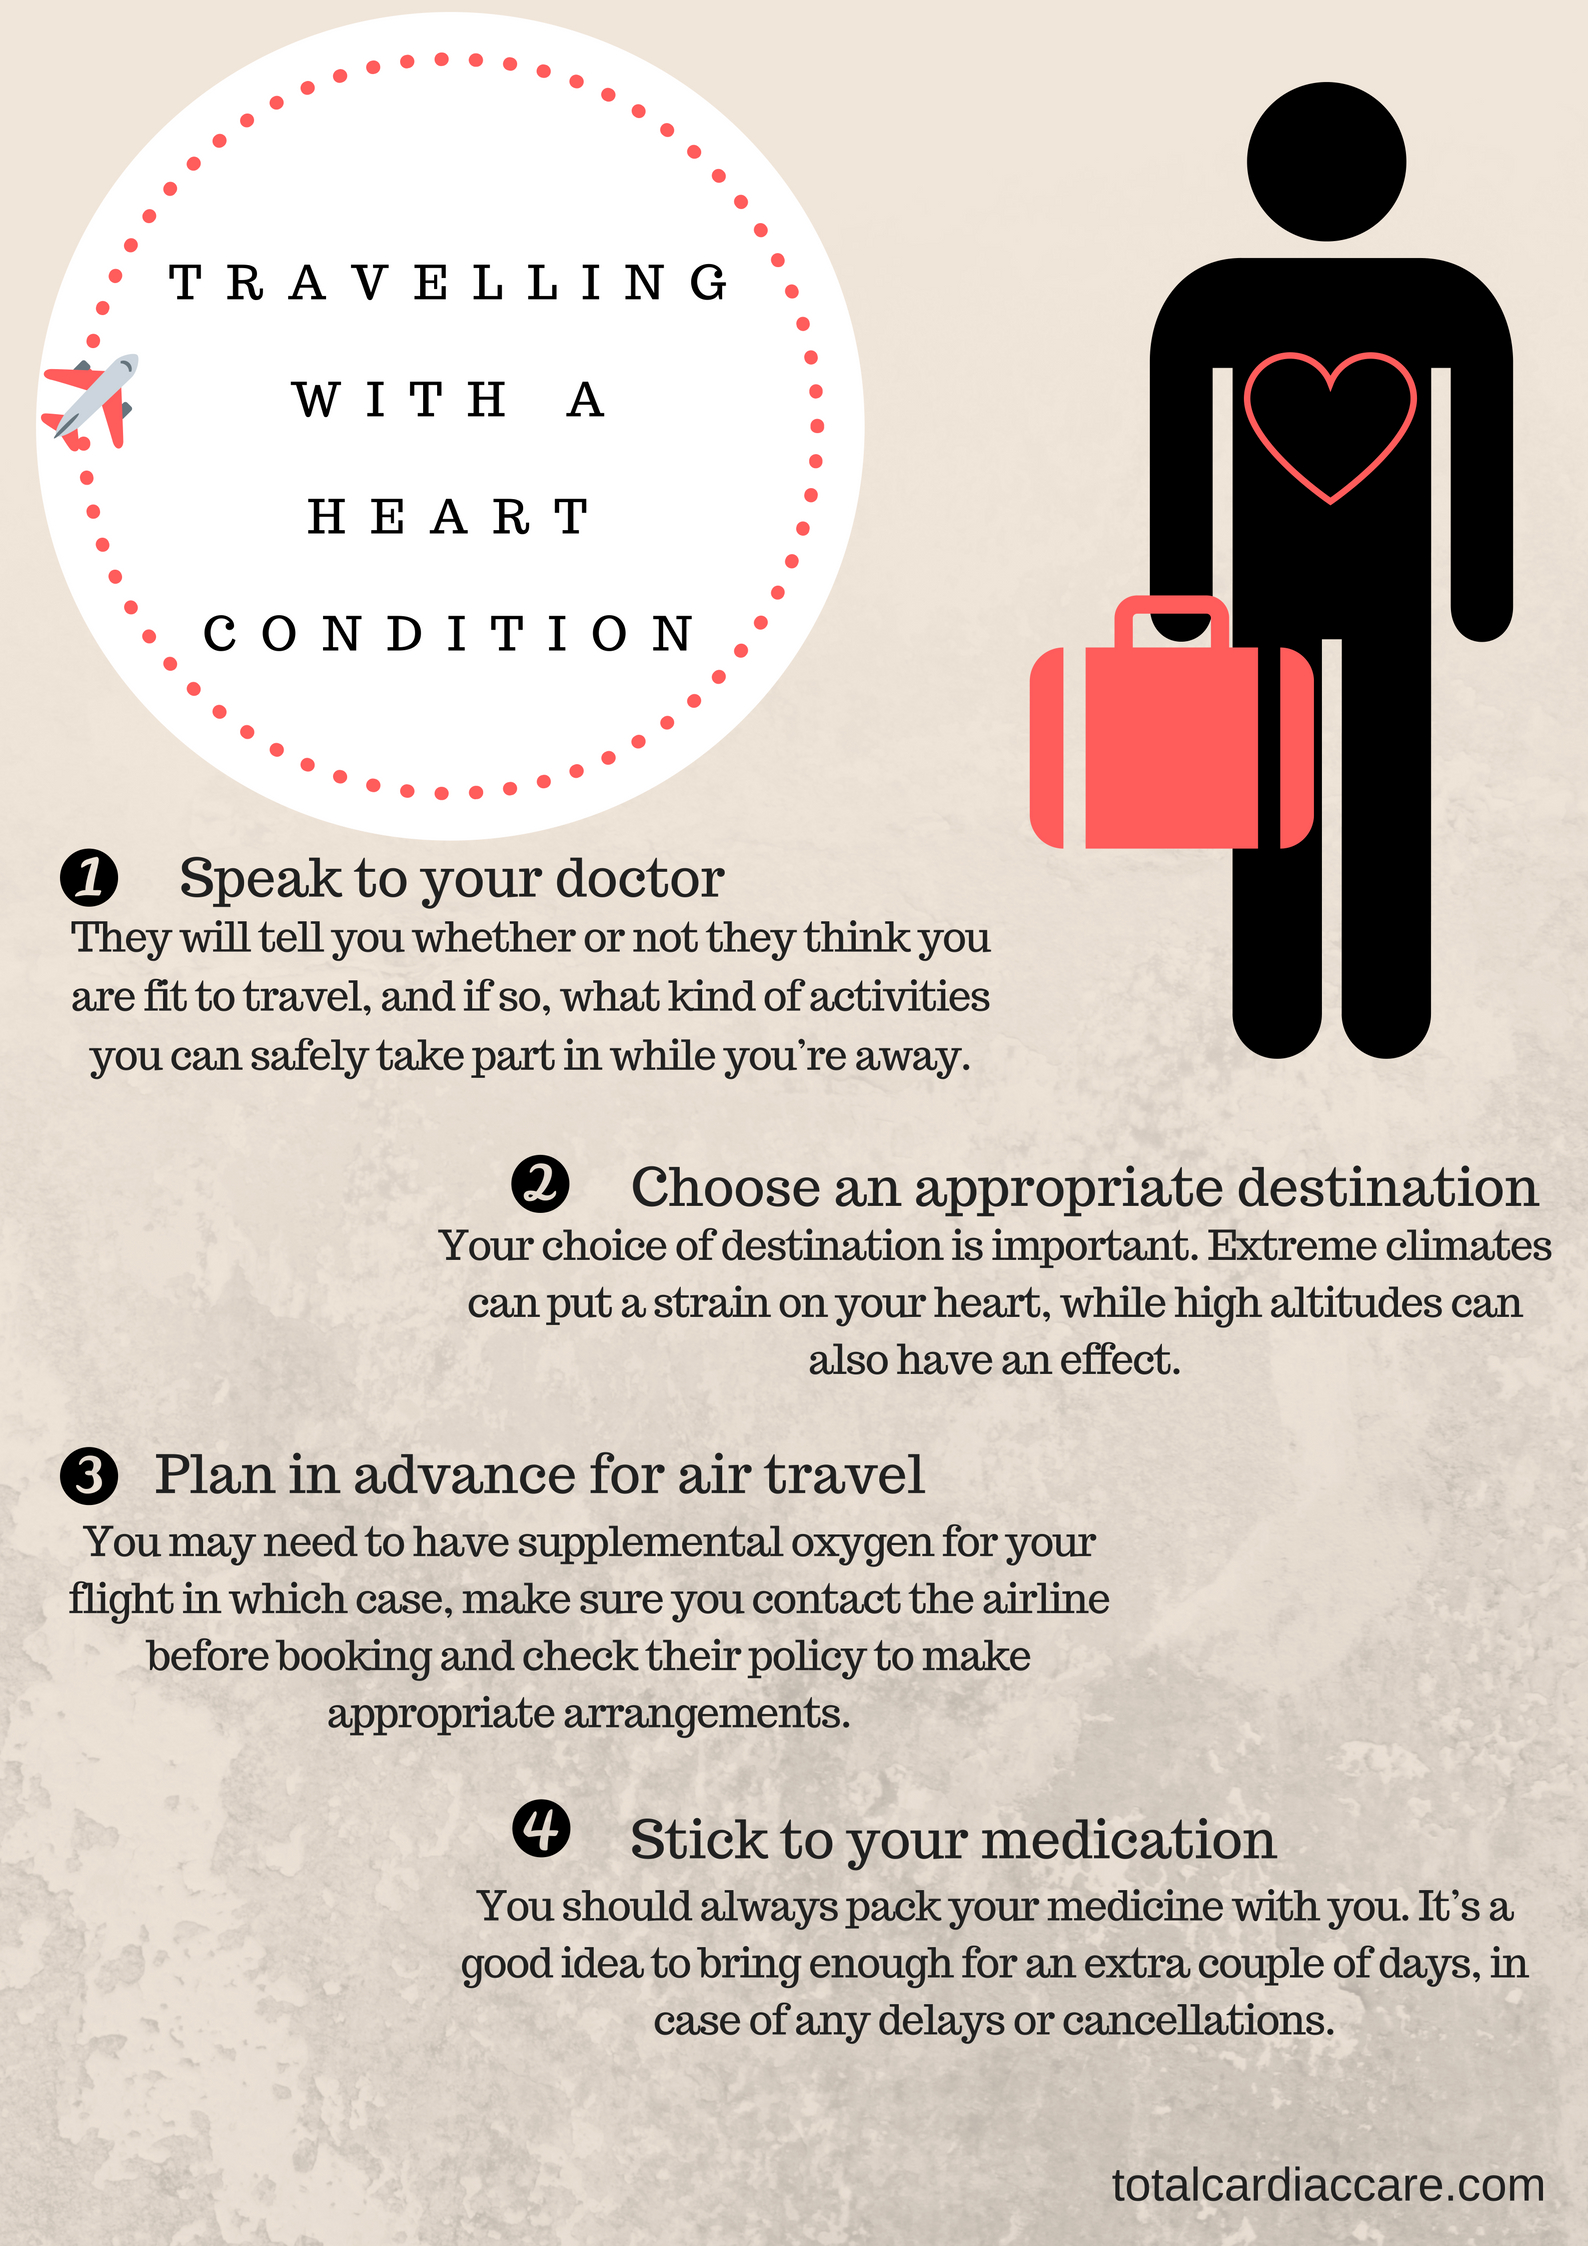 This image explains steps to be taken care before travelling for patients with a heart condition.